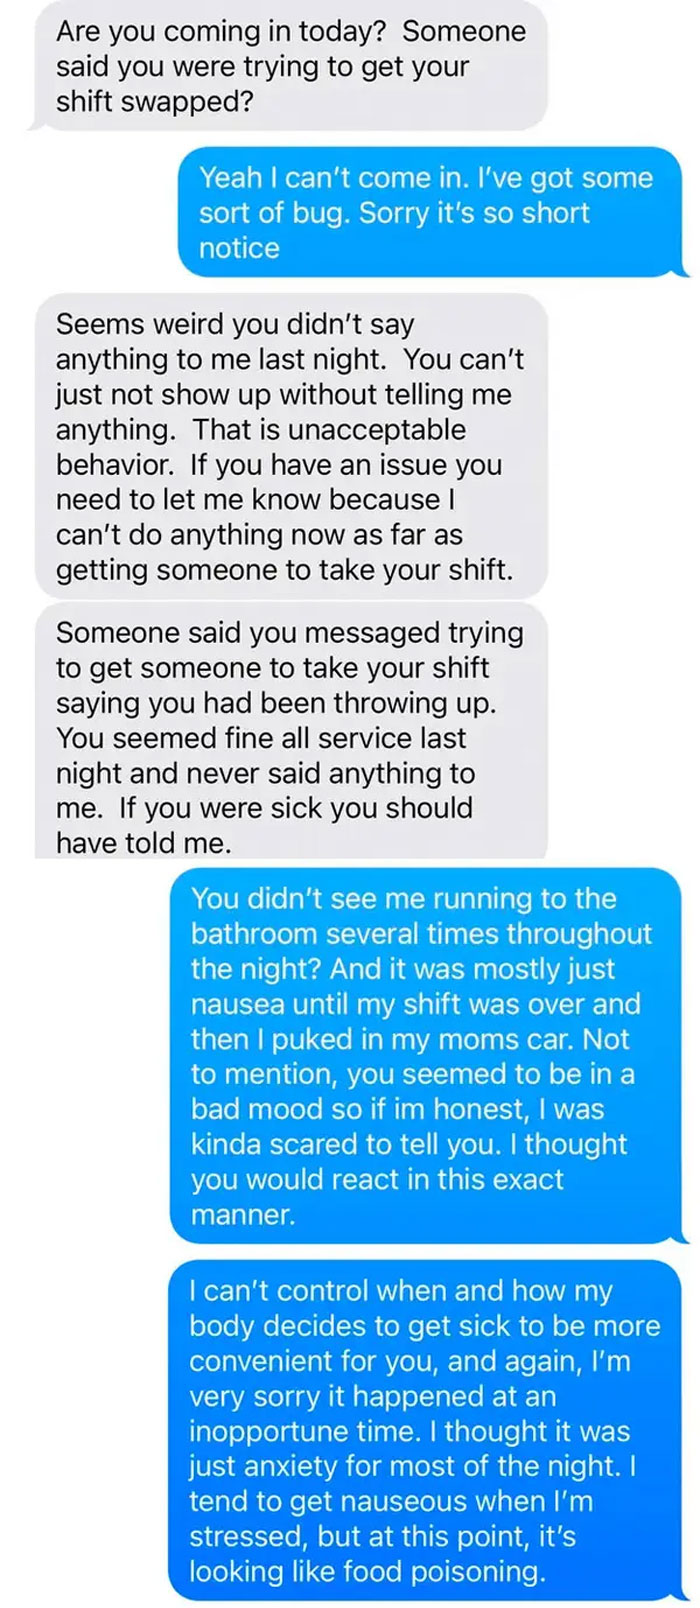 I (16f) Was Sick Throughout My Shift Last Night And Had Another Shift This Morning. Clearly I Called In. My [jerk] Boss Didn’t Take That Well